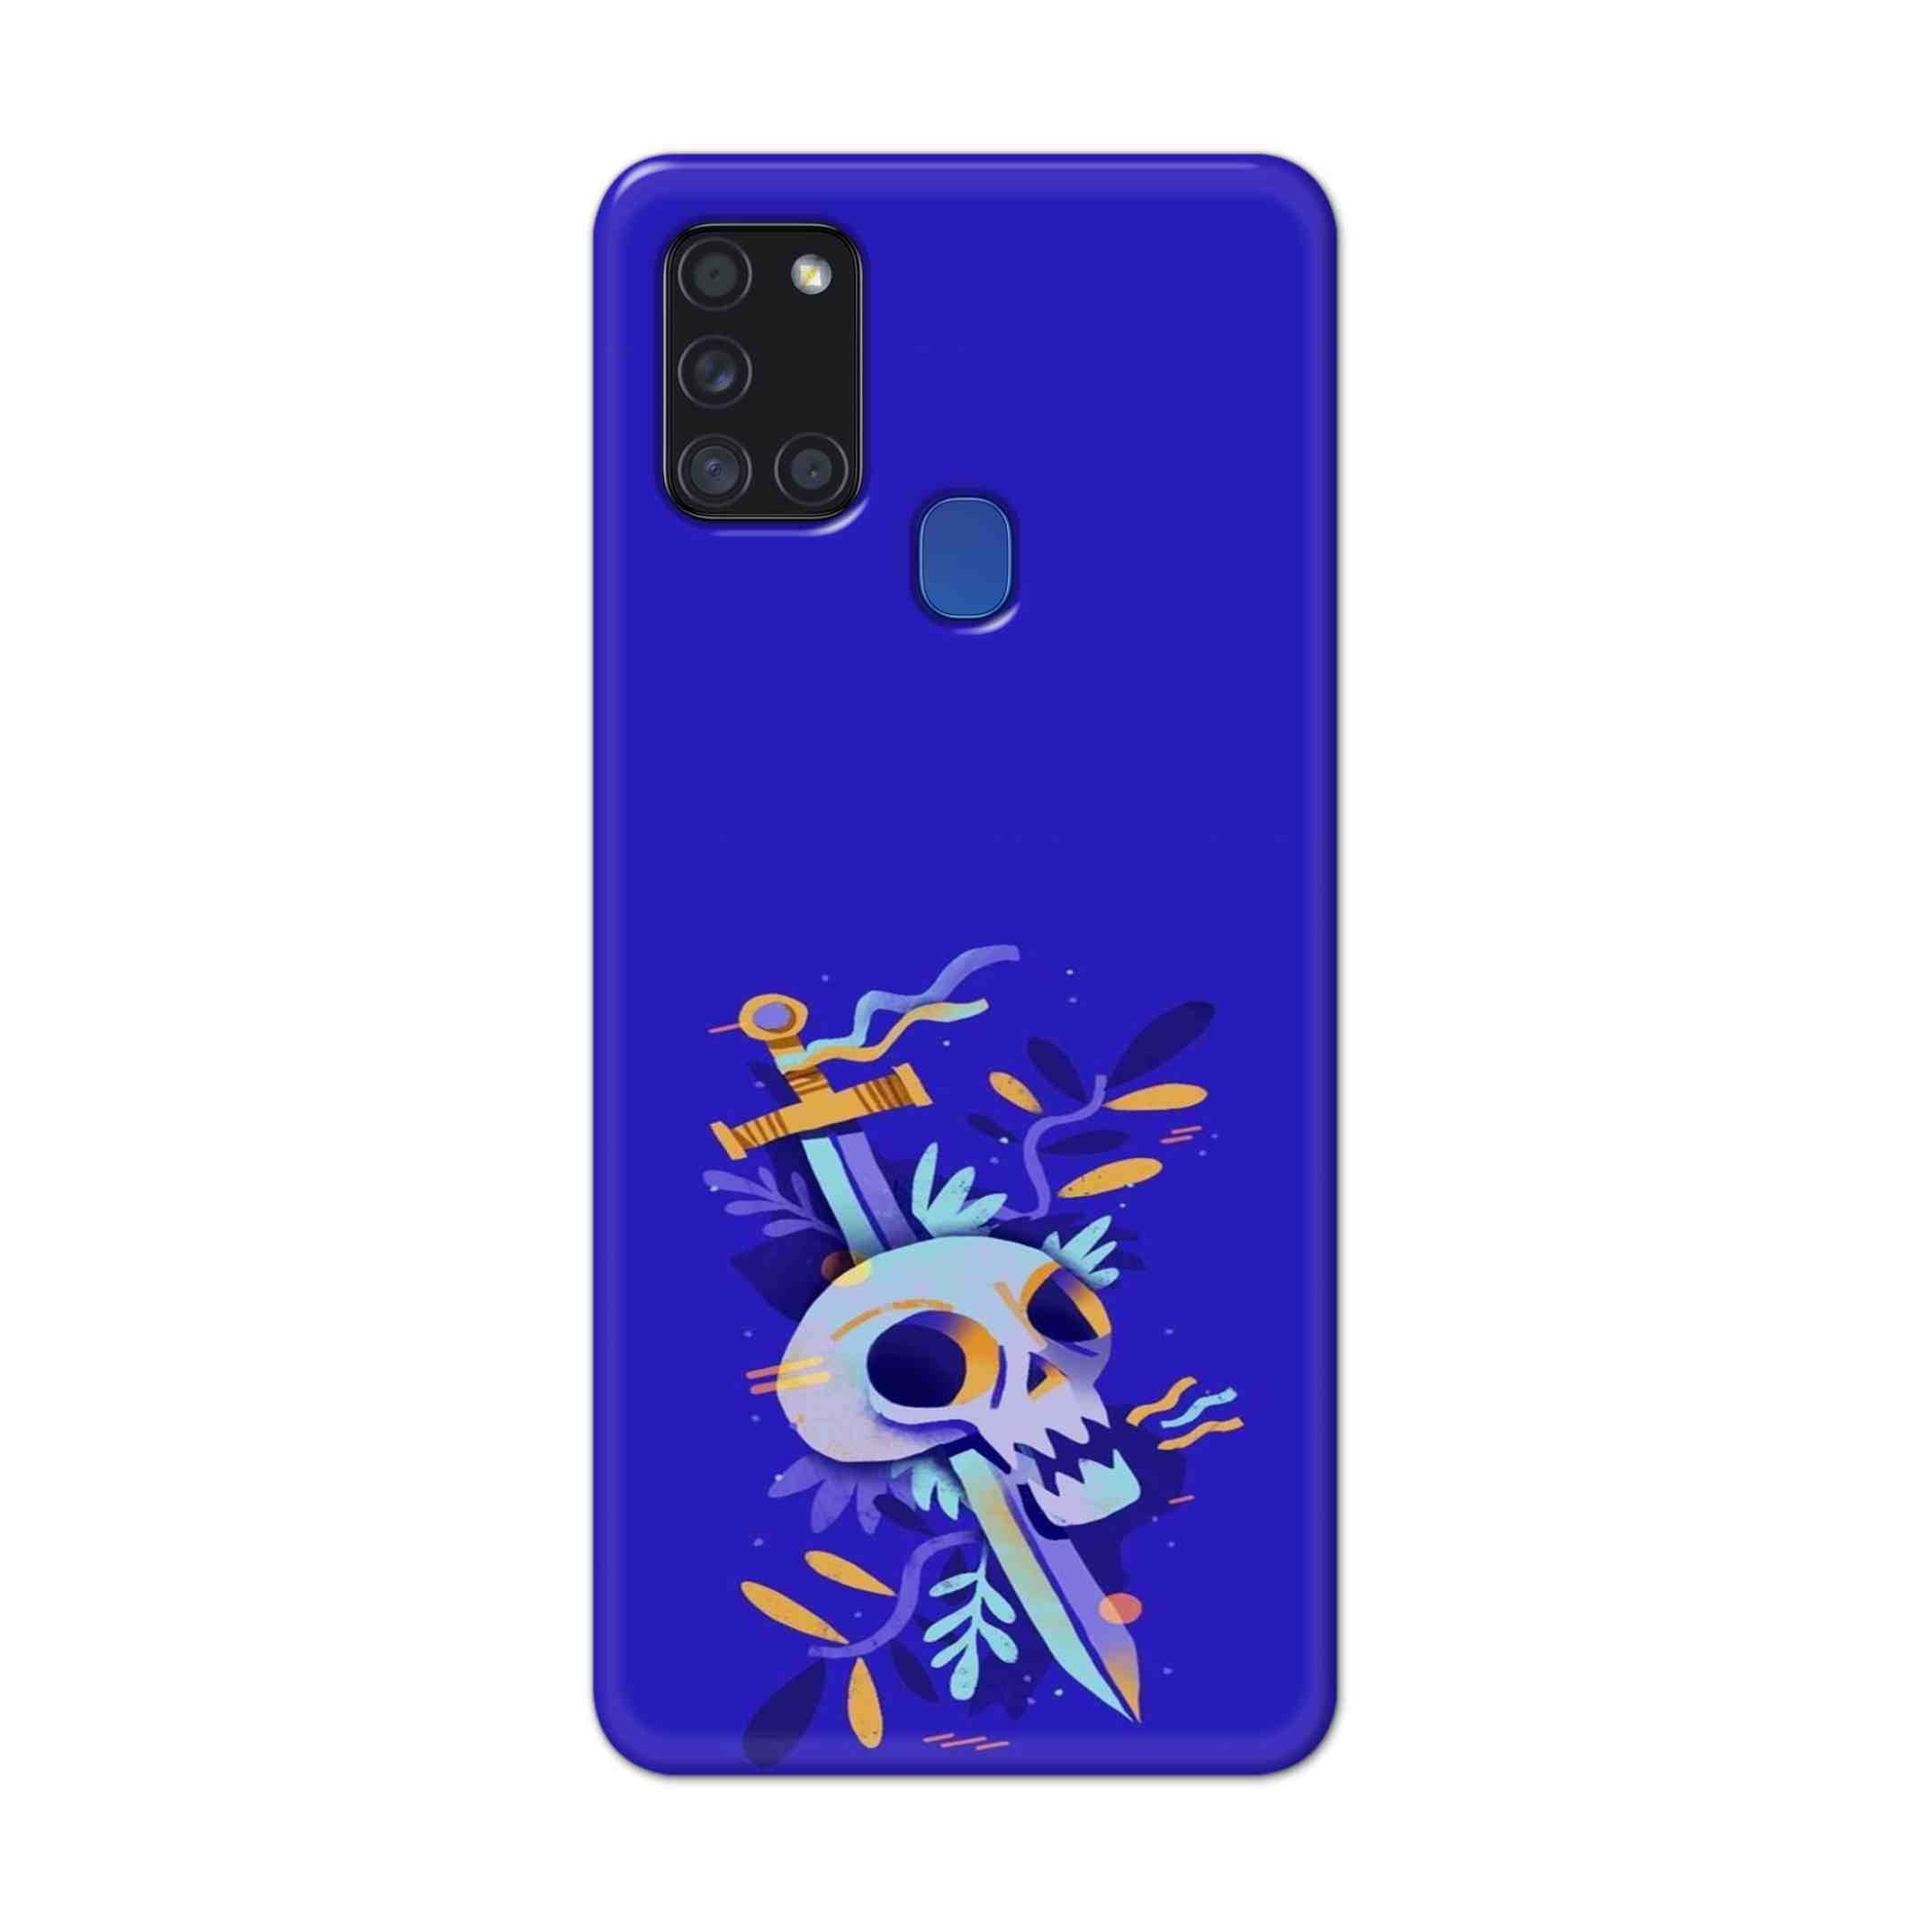 Buy Blue Skull Hard Back Mobile Phone Case Cover For Samsung Galaxy A21s Online